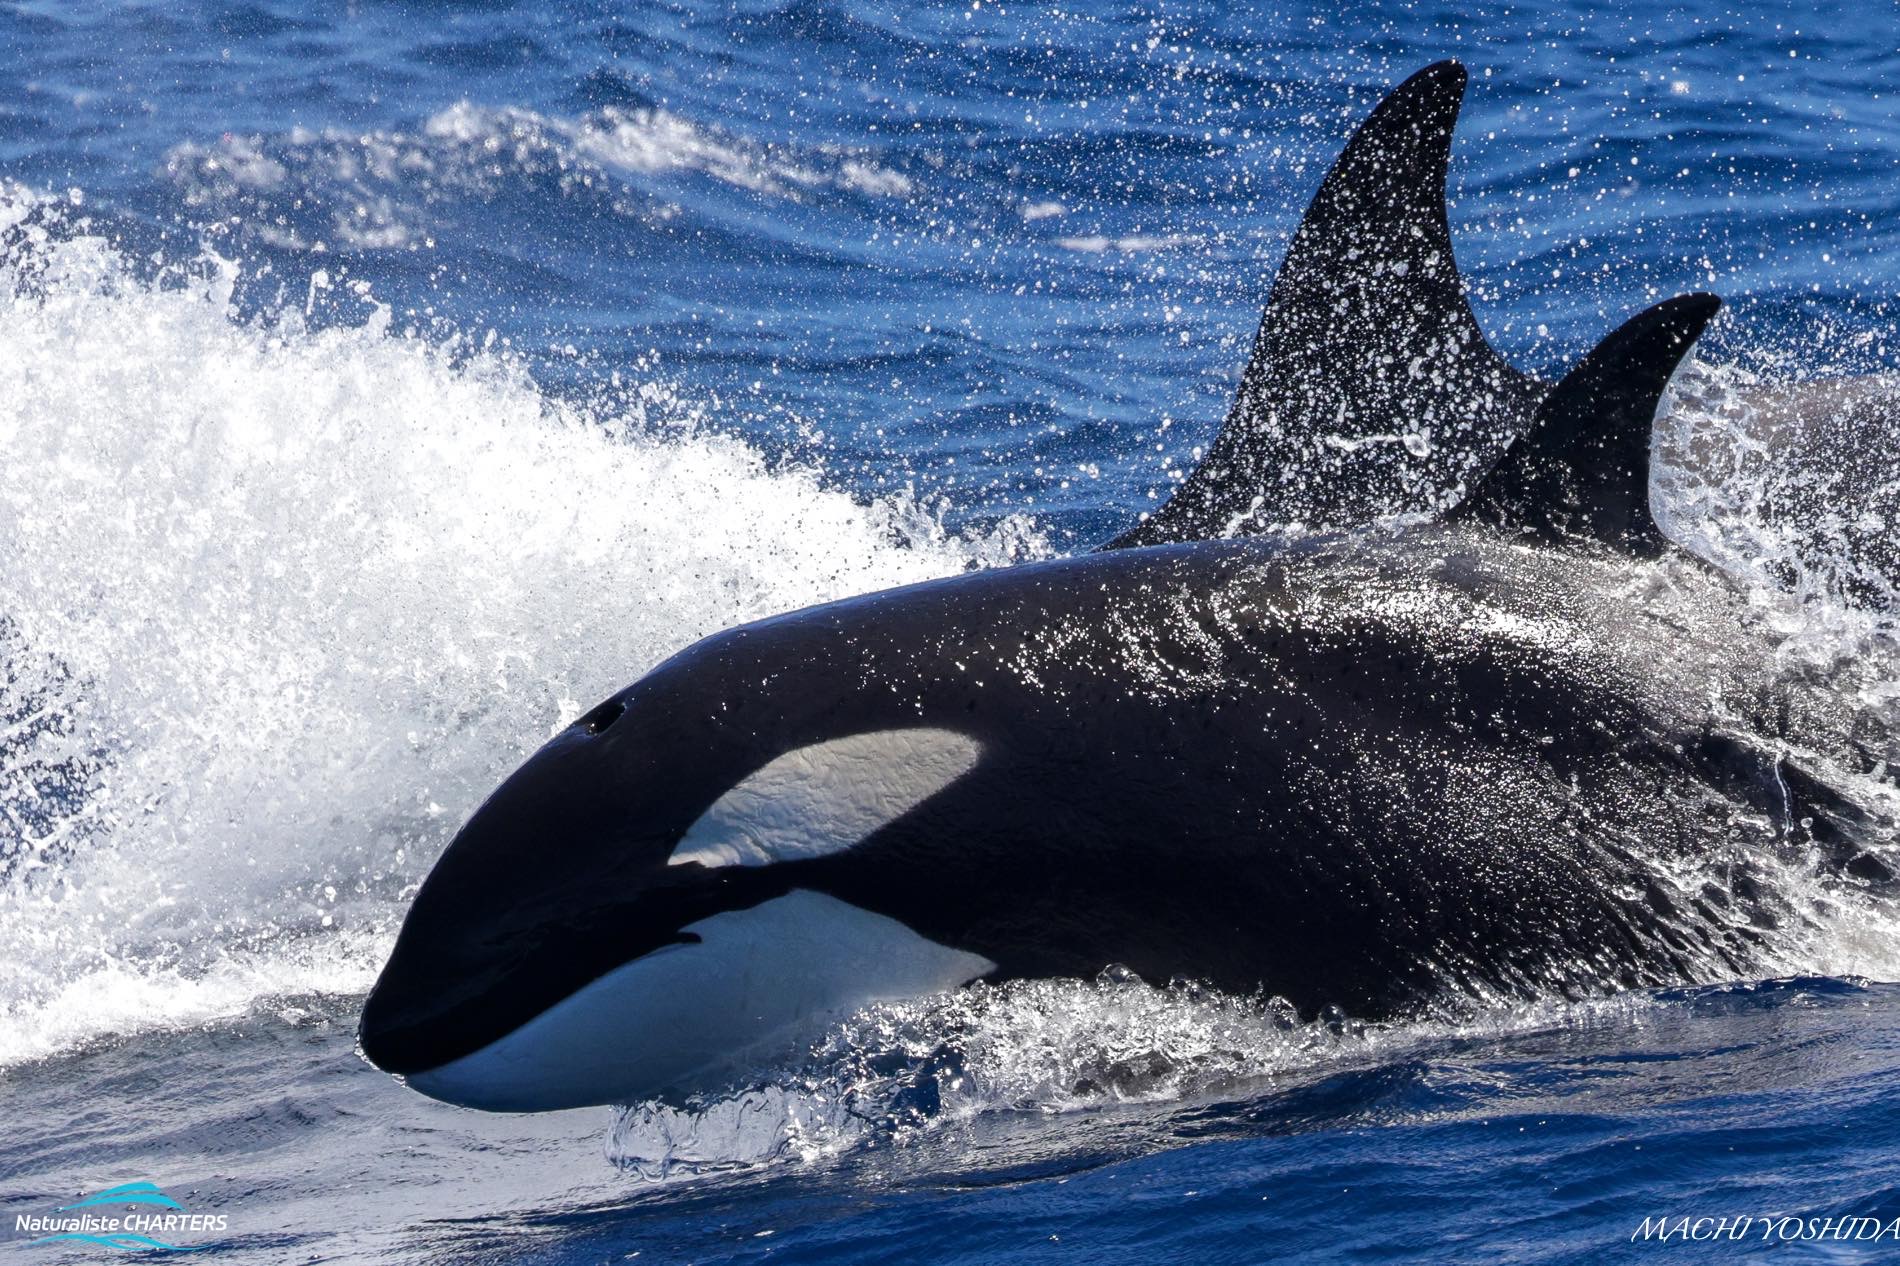 Killer whales can travel at great speeds, churning the water in their wake